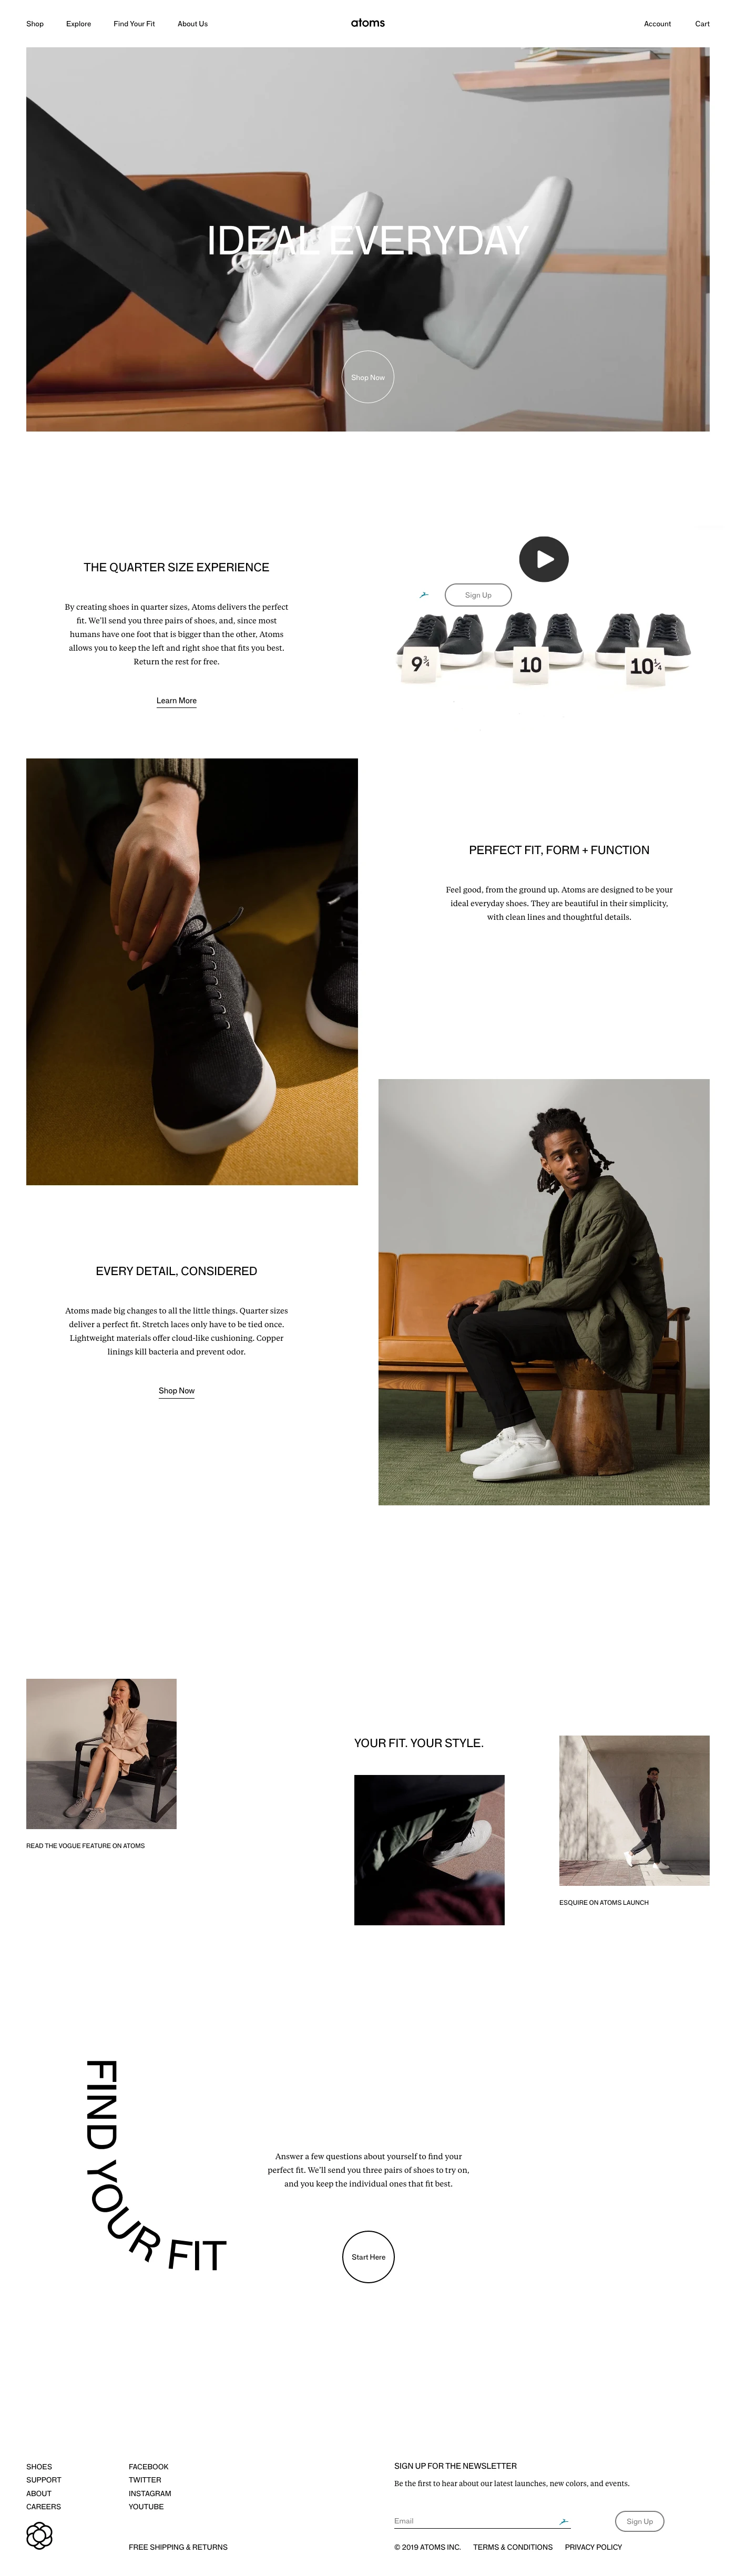 Atoms Landing Page Example: Ideal everyday. Atoms are the world’s first shoes to come in quarter sizes to ensure a perfect fit. The unisex shoes have a simple, classic design that works with your style.